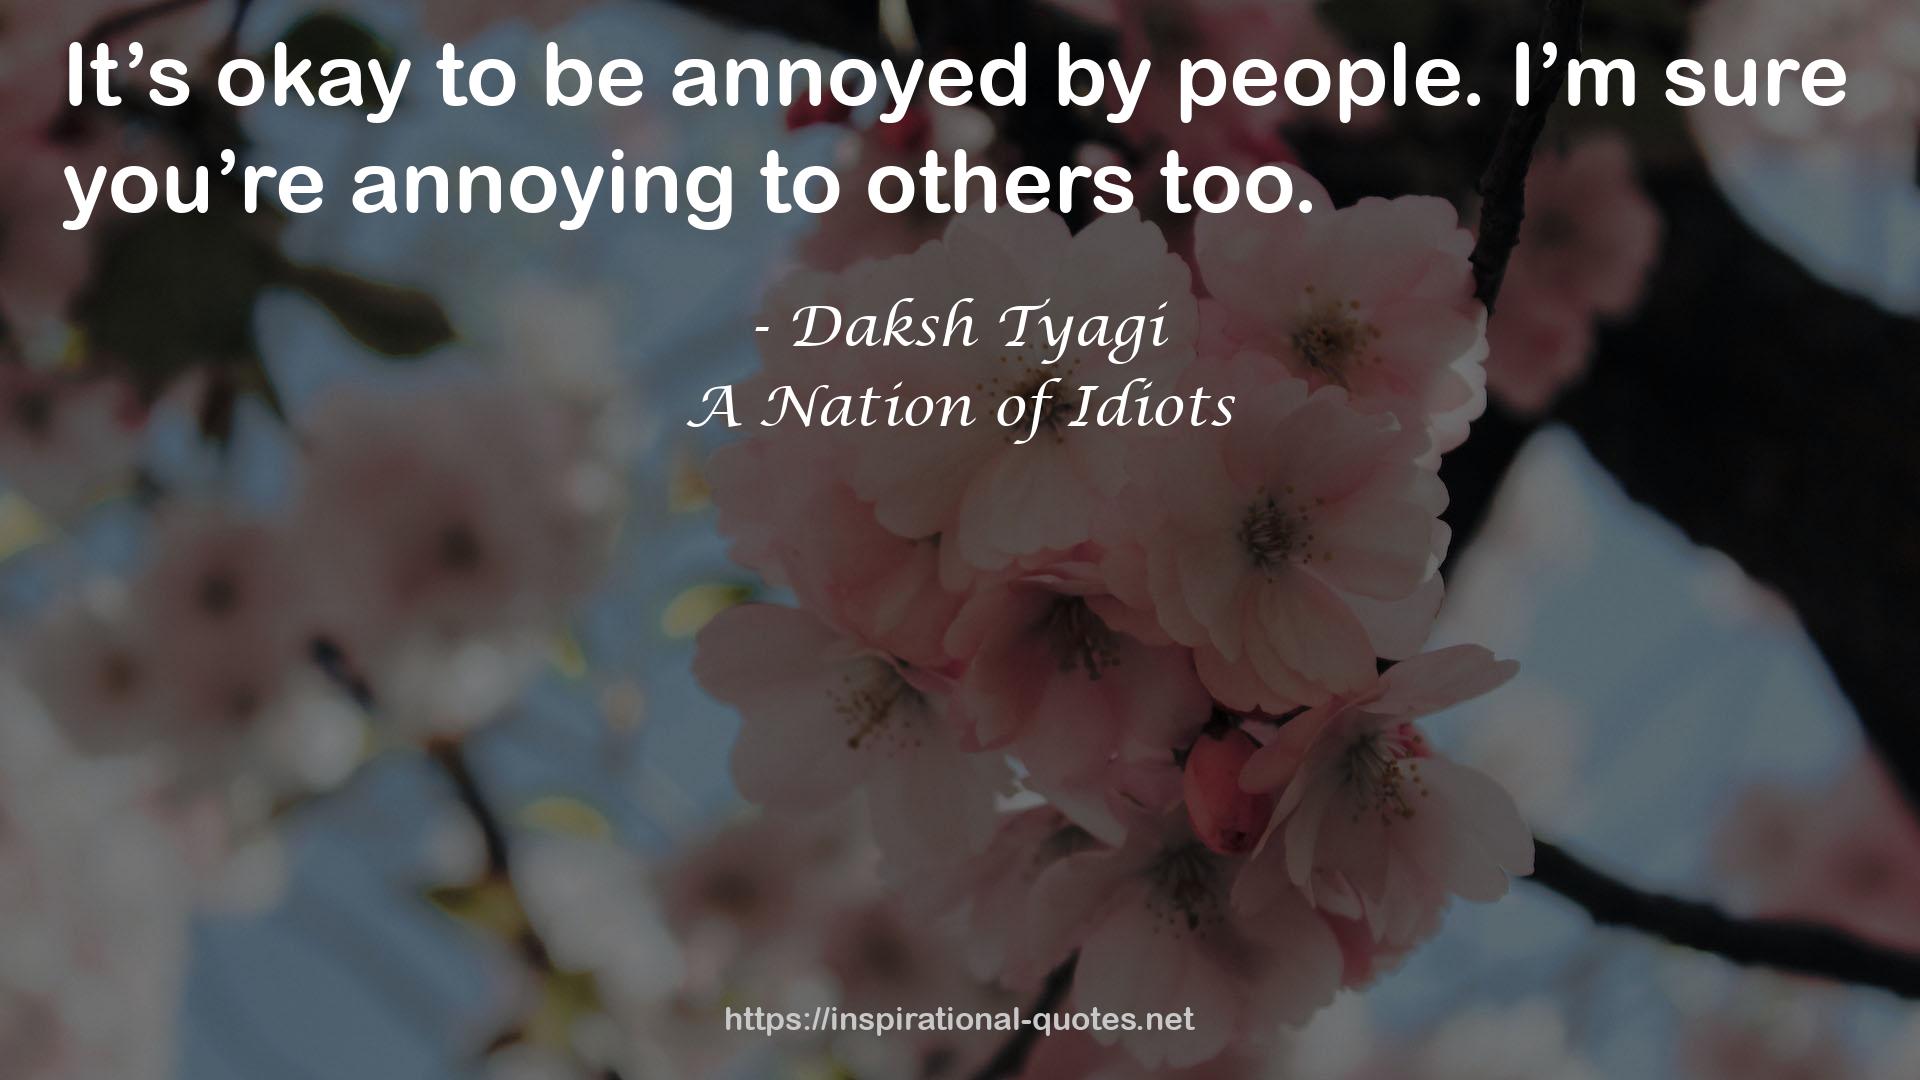 A Nation of Idiots QUOTES